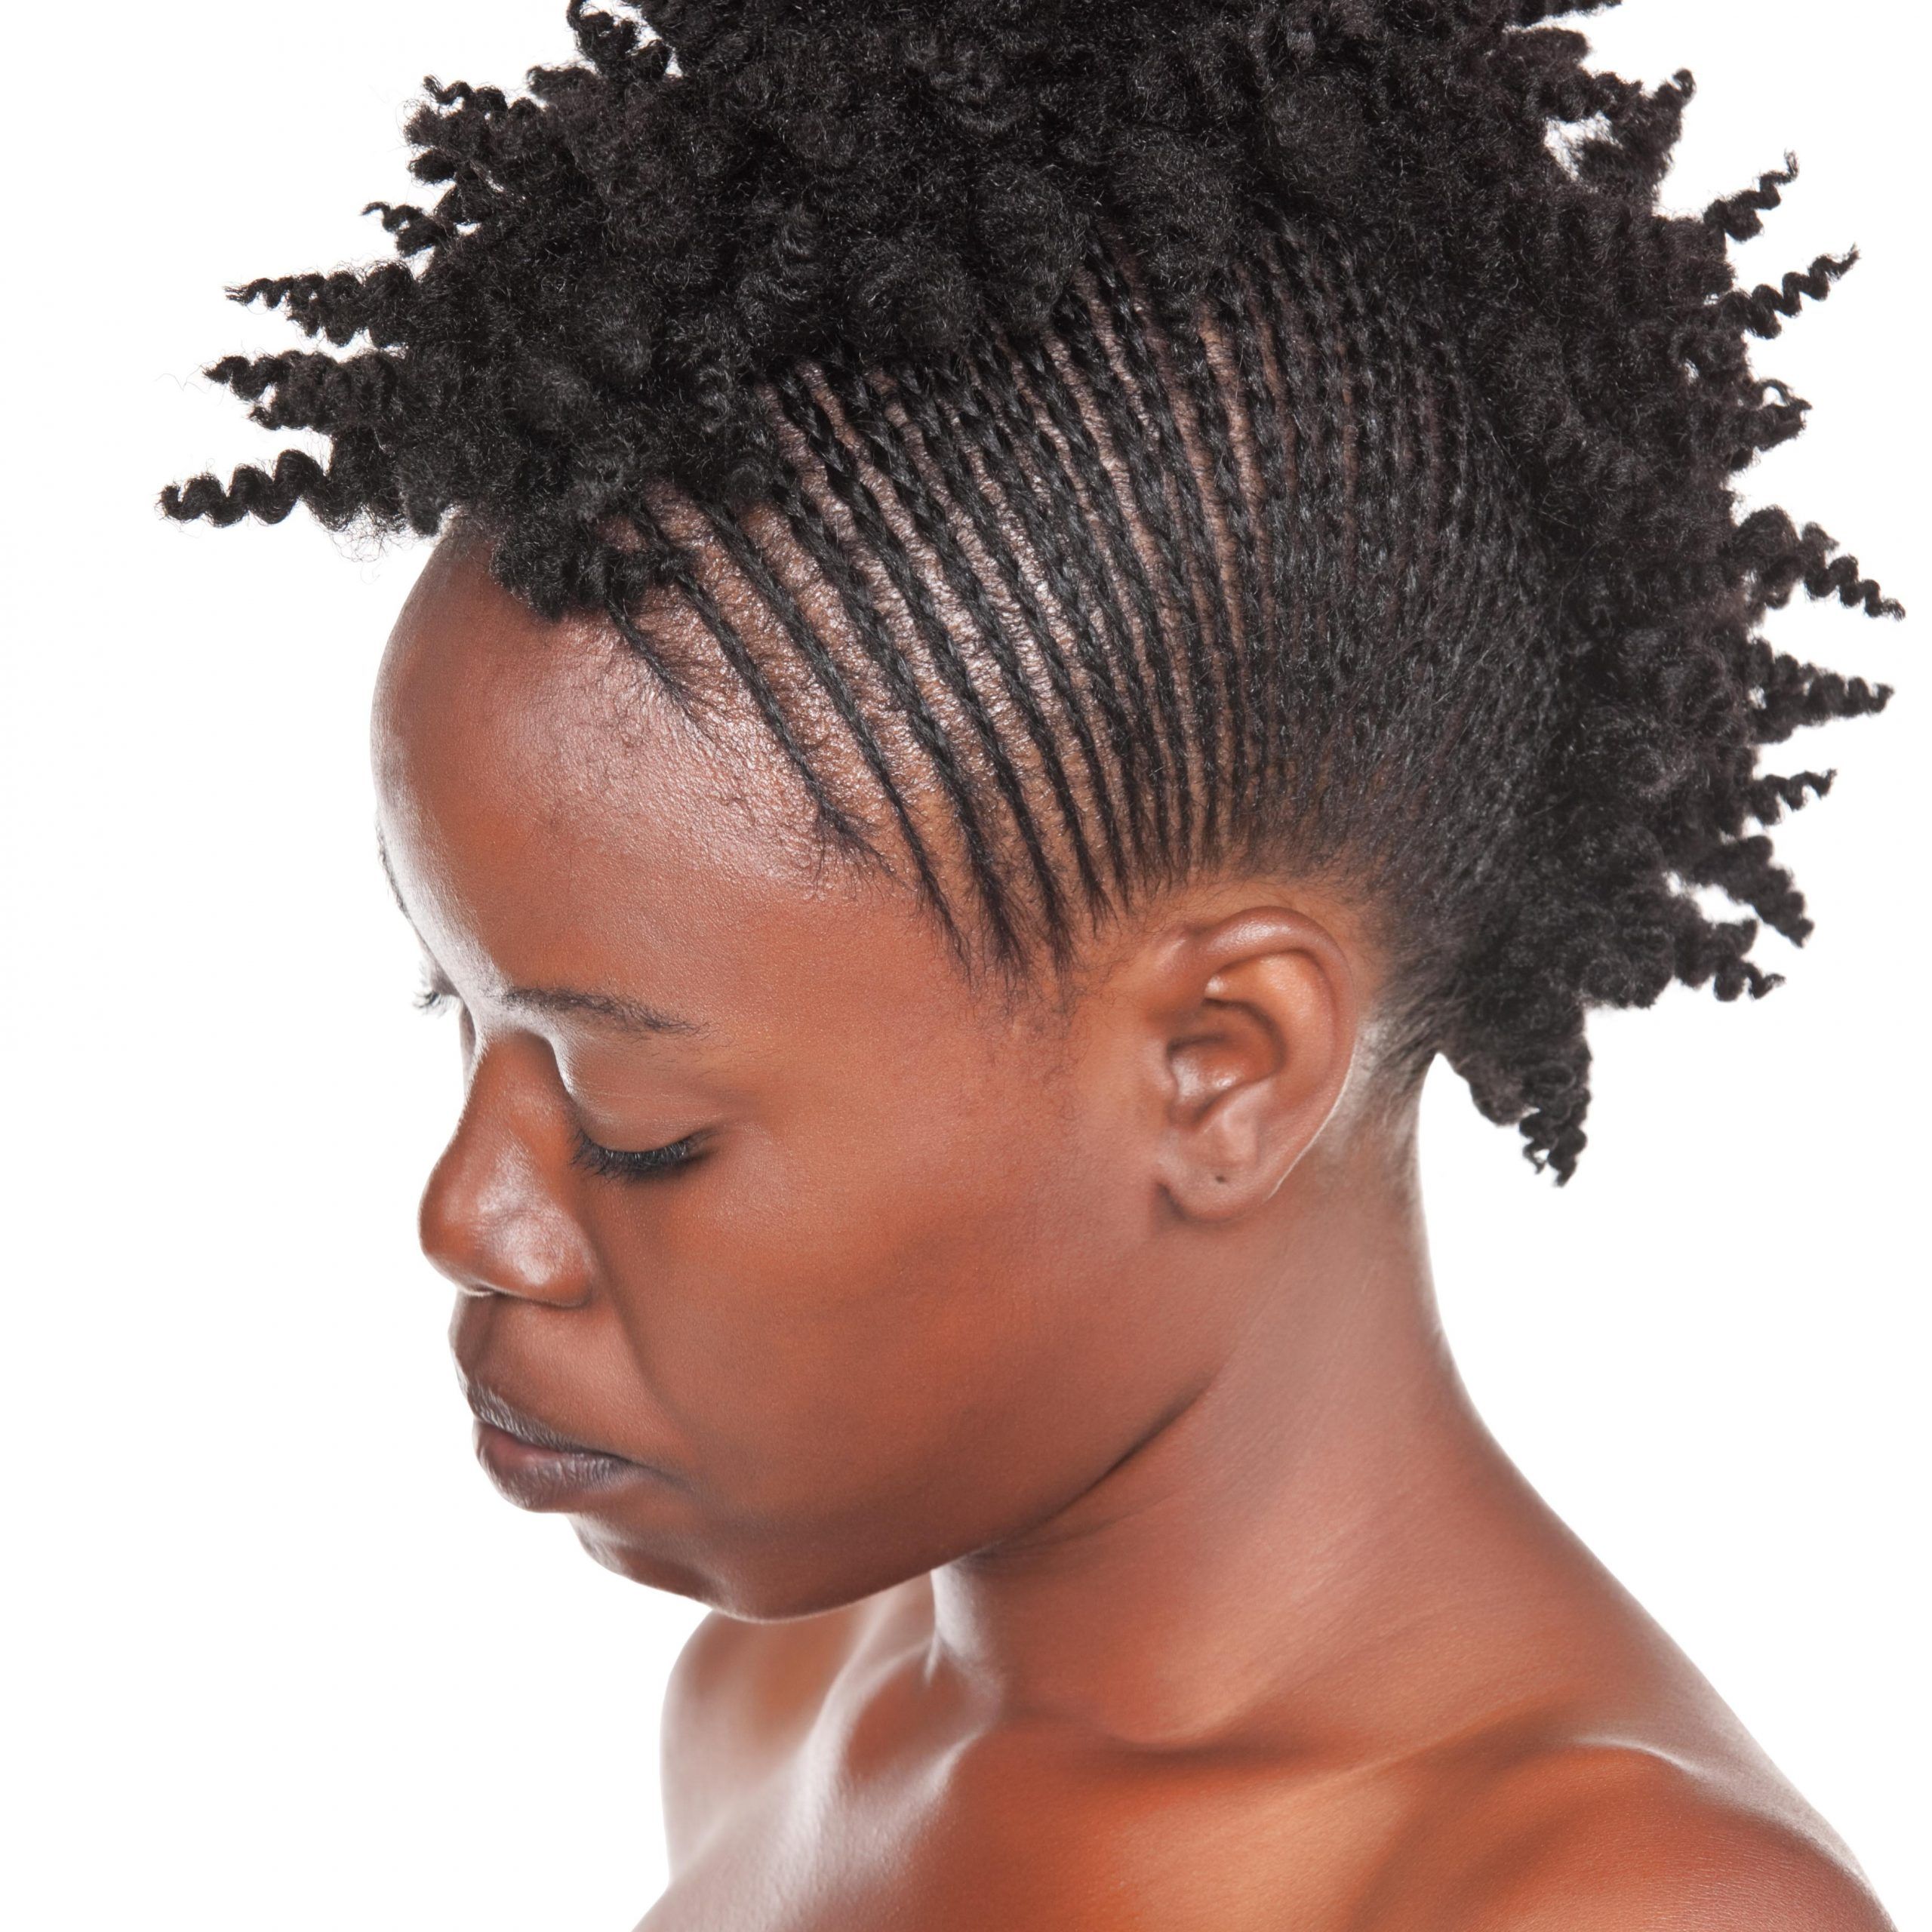 6 Best Mohawk Braids For Natural Hair In 2019 | All Things Hair Within Braided Mohawk Hairstyles For Short Hair (View 7 of 20)